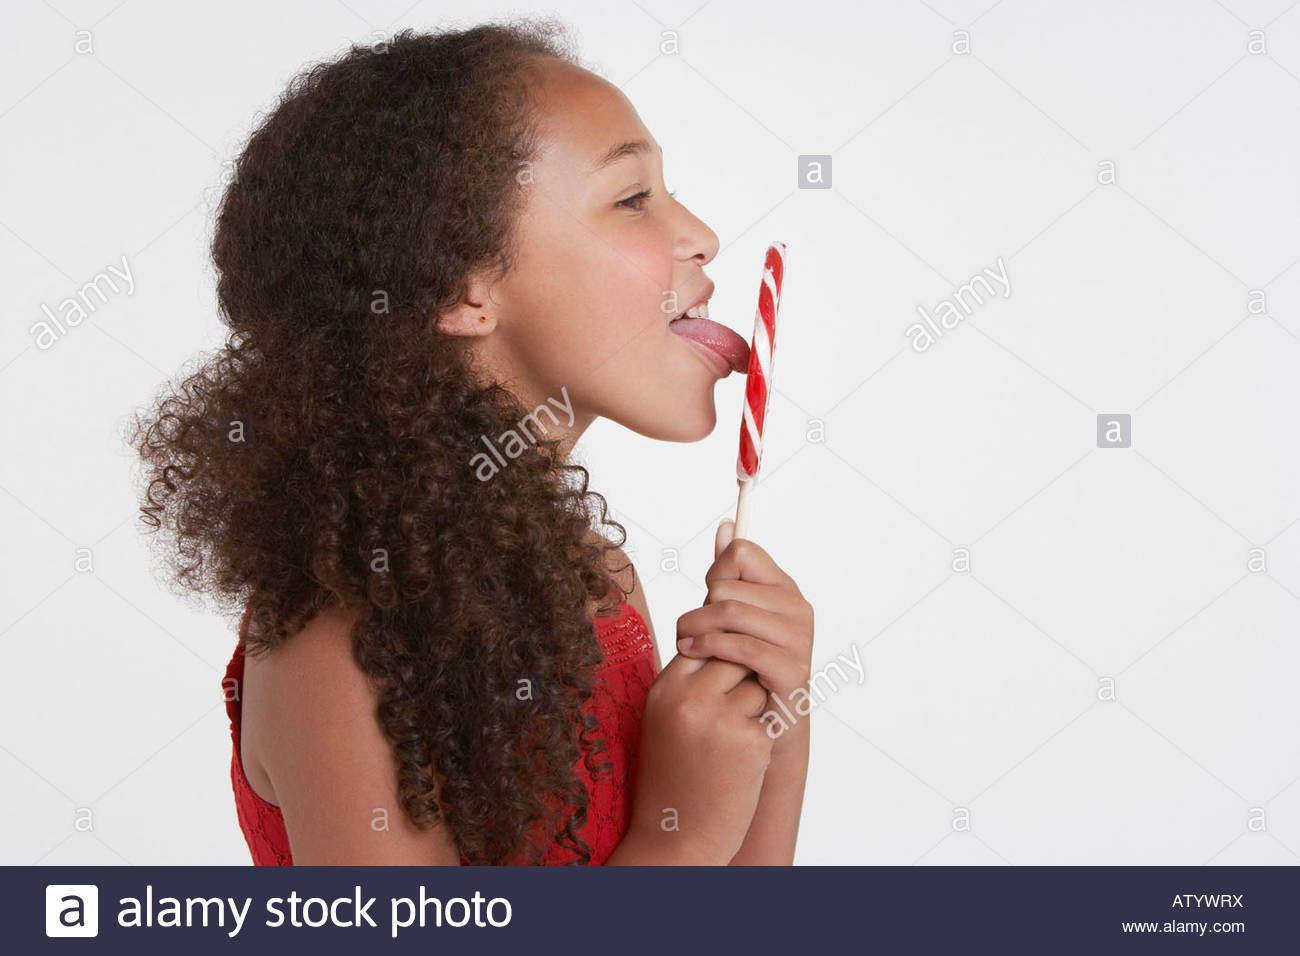 Peanut reccomend Young girls lick their self